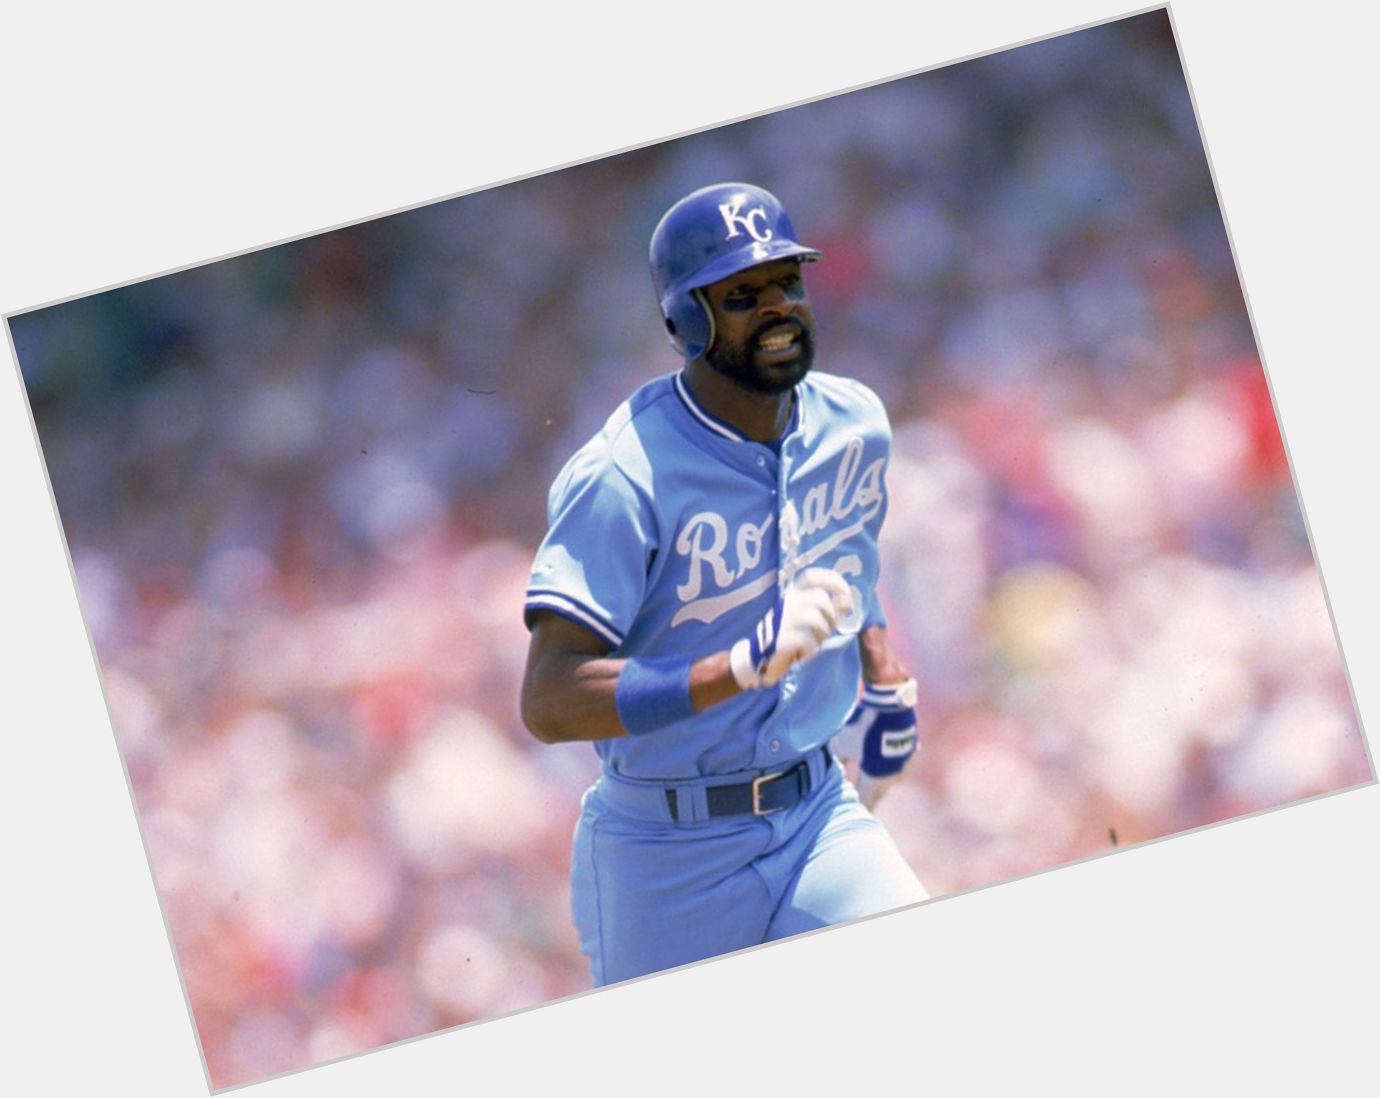 Happy Birthday to former Kansas City Royals player Willie Wilson(1976-1990) who turns 63 today! 